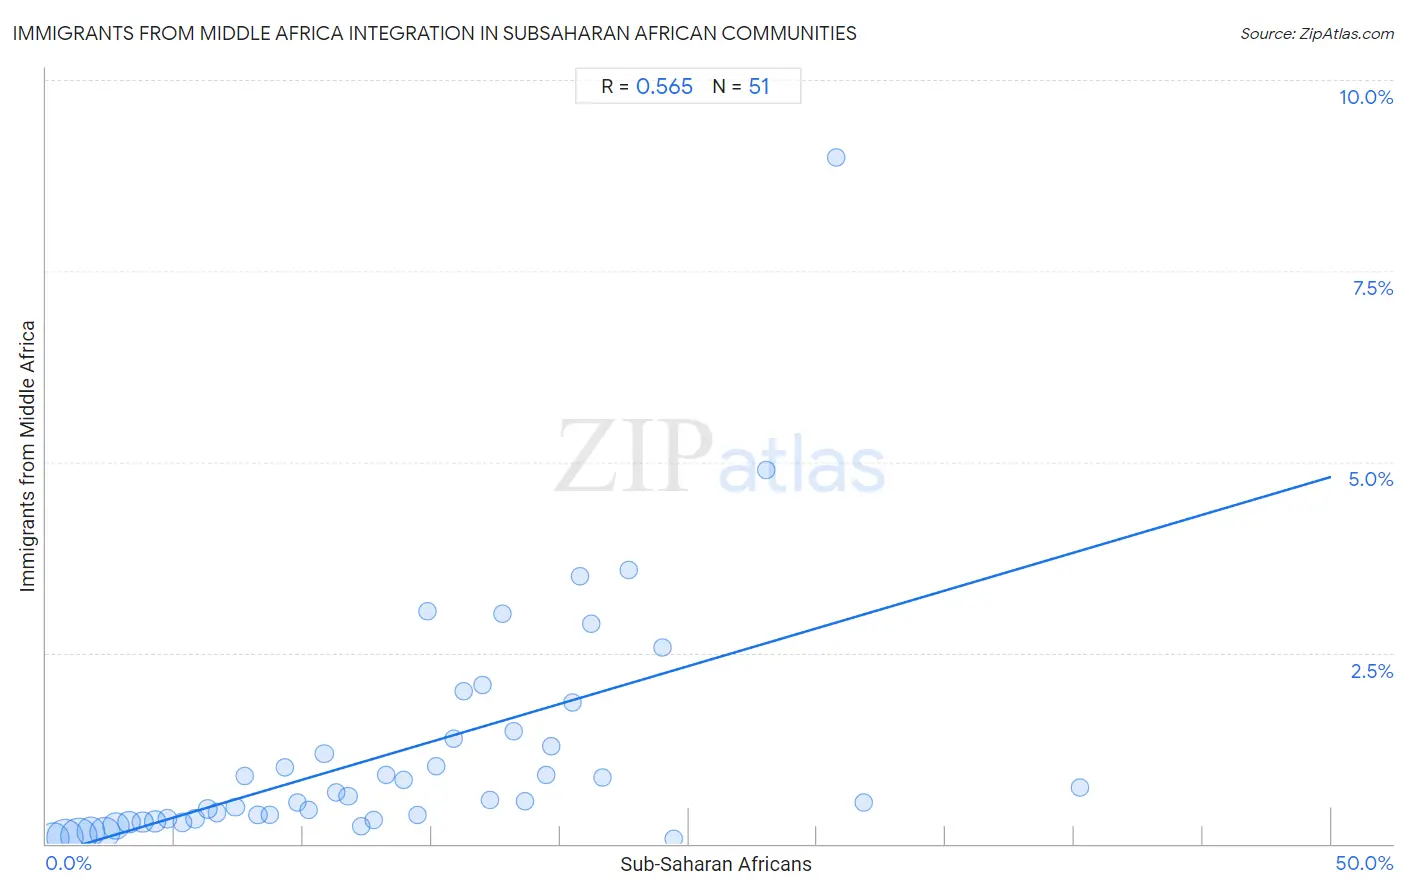 Subsaharan African Integration in Immigrants from Middle Africa Communities